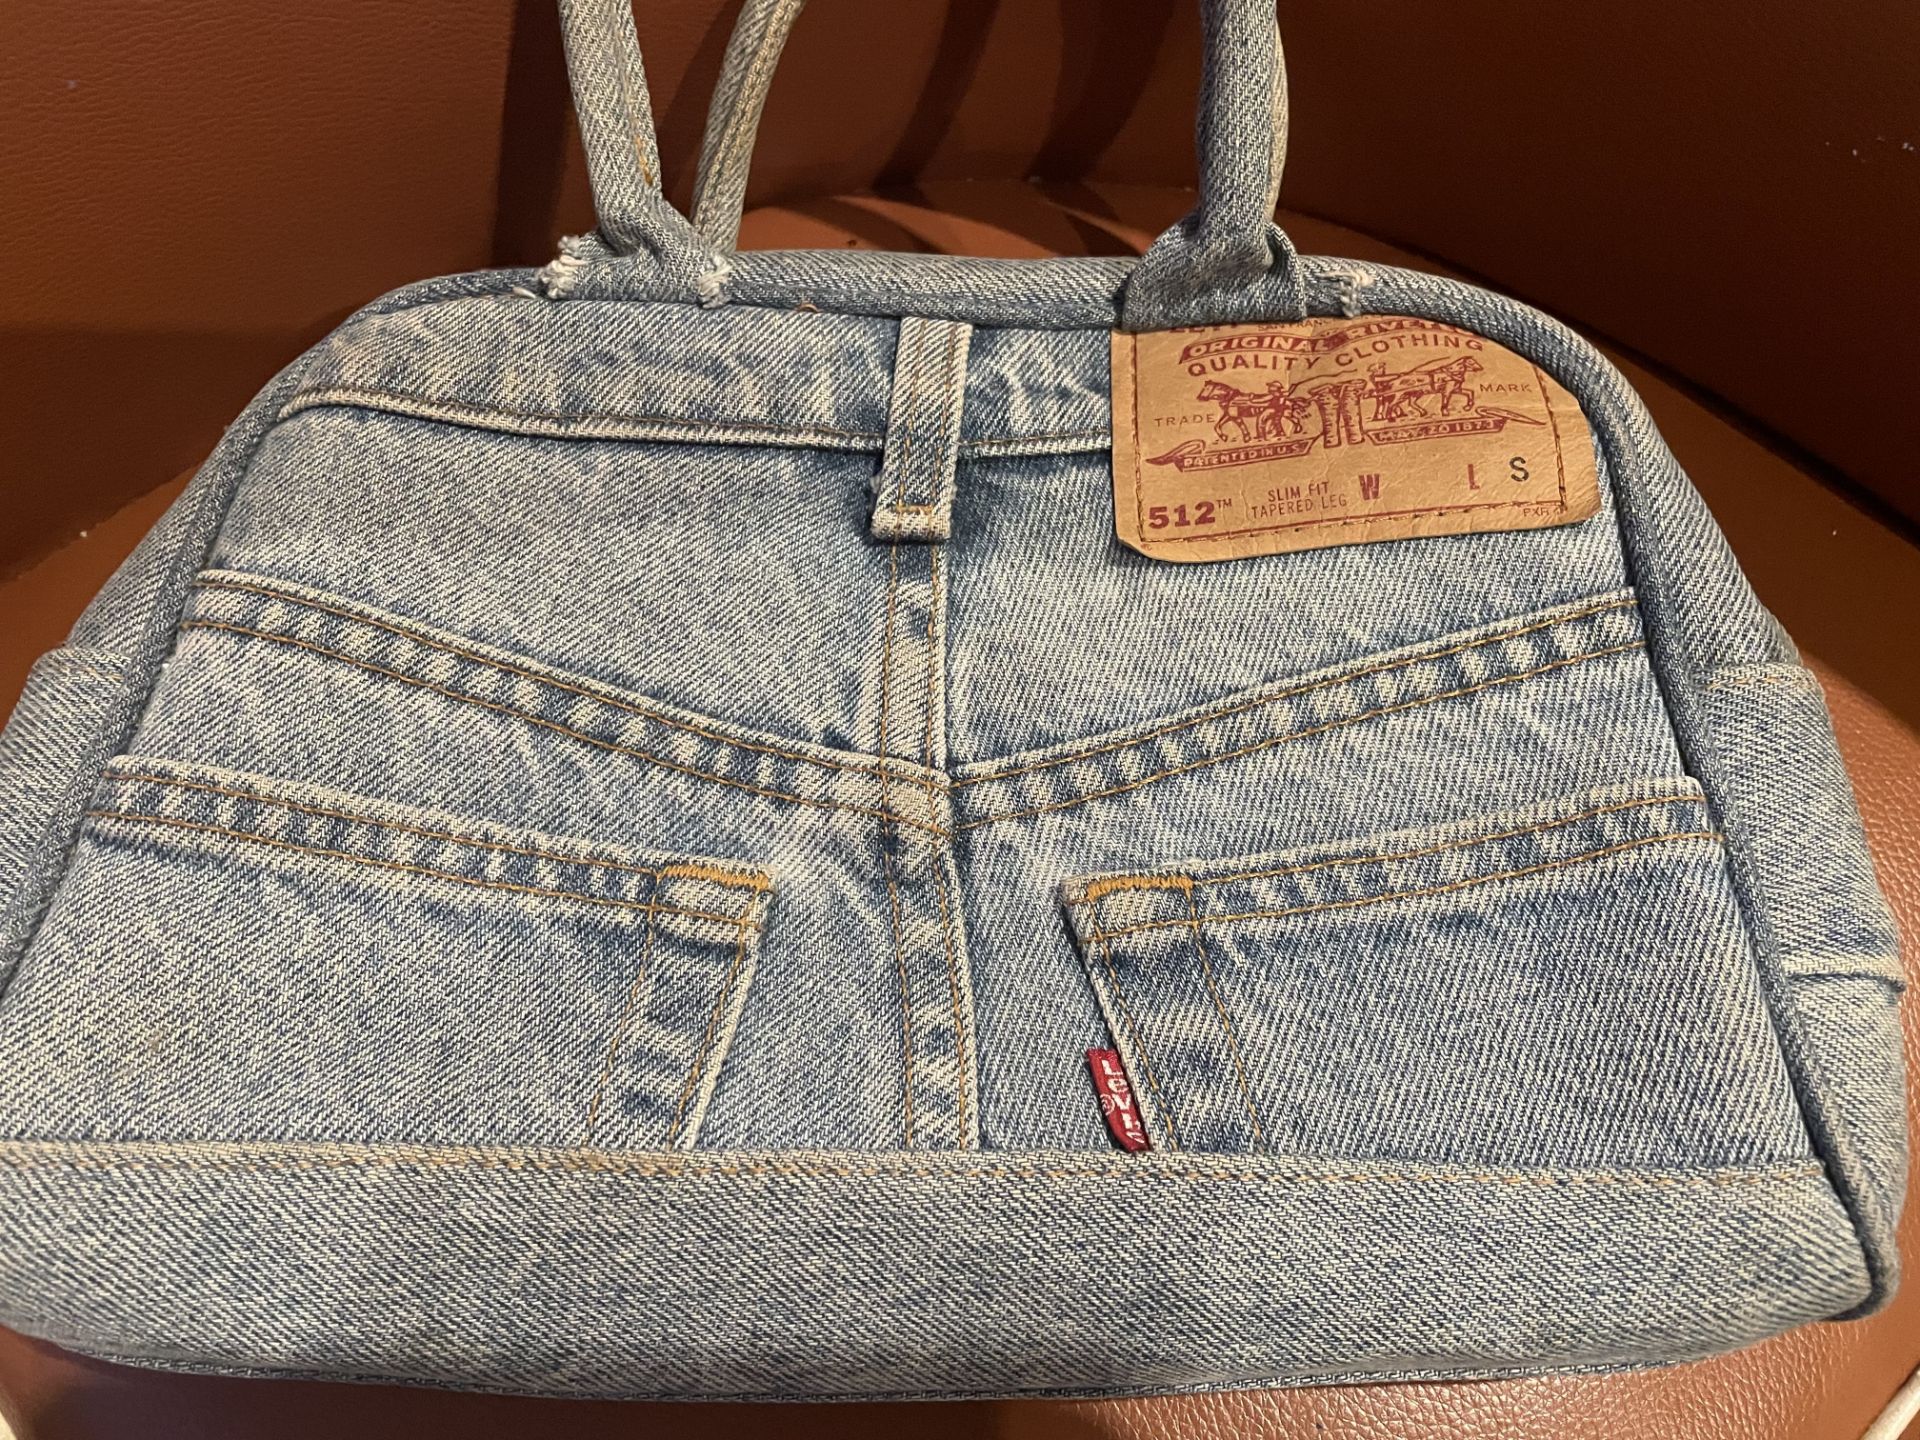 Levis Hand Bag - Image 2 of 2